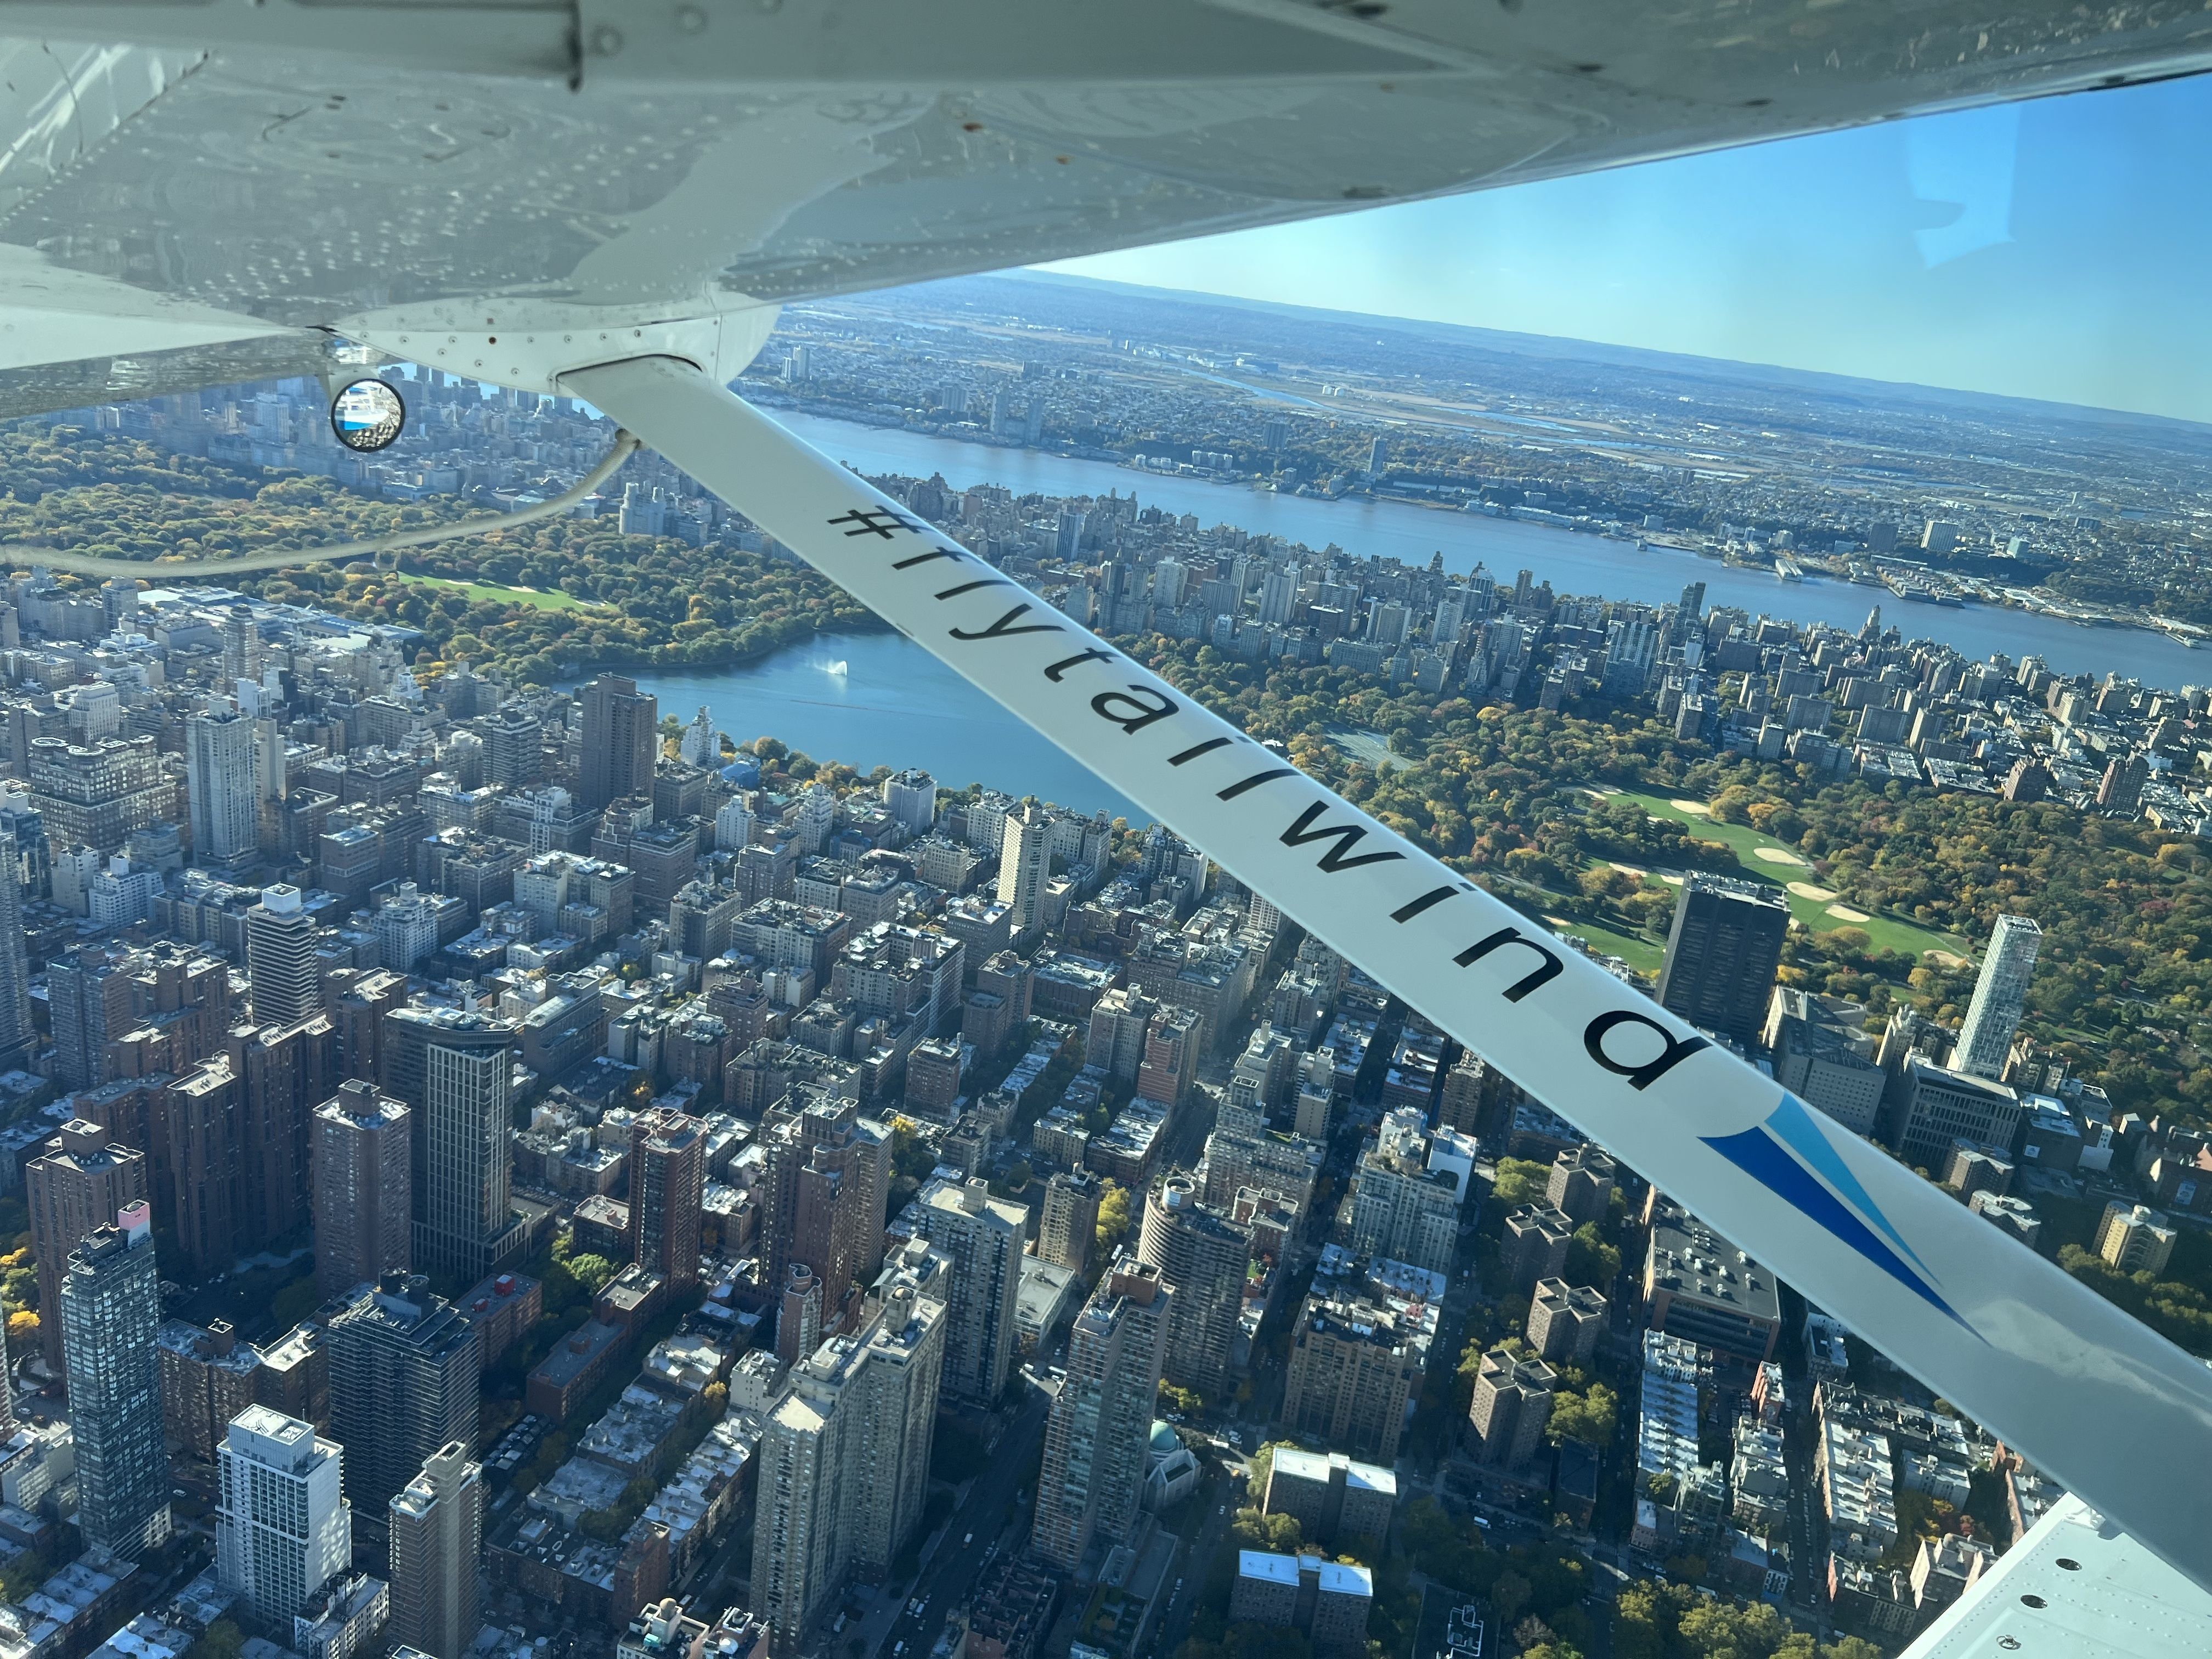 An overhead view of Manhattan as seen from a seat on the Tailwind Air seaplane.